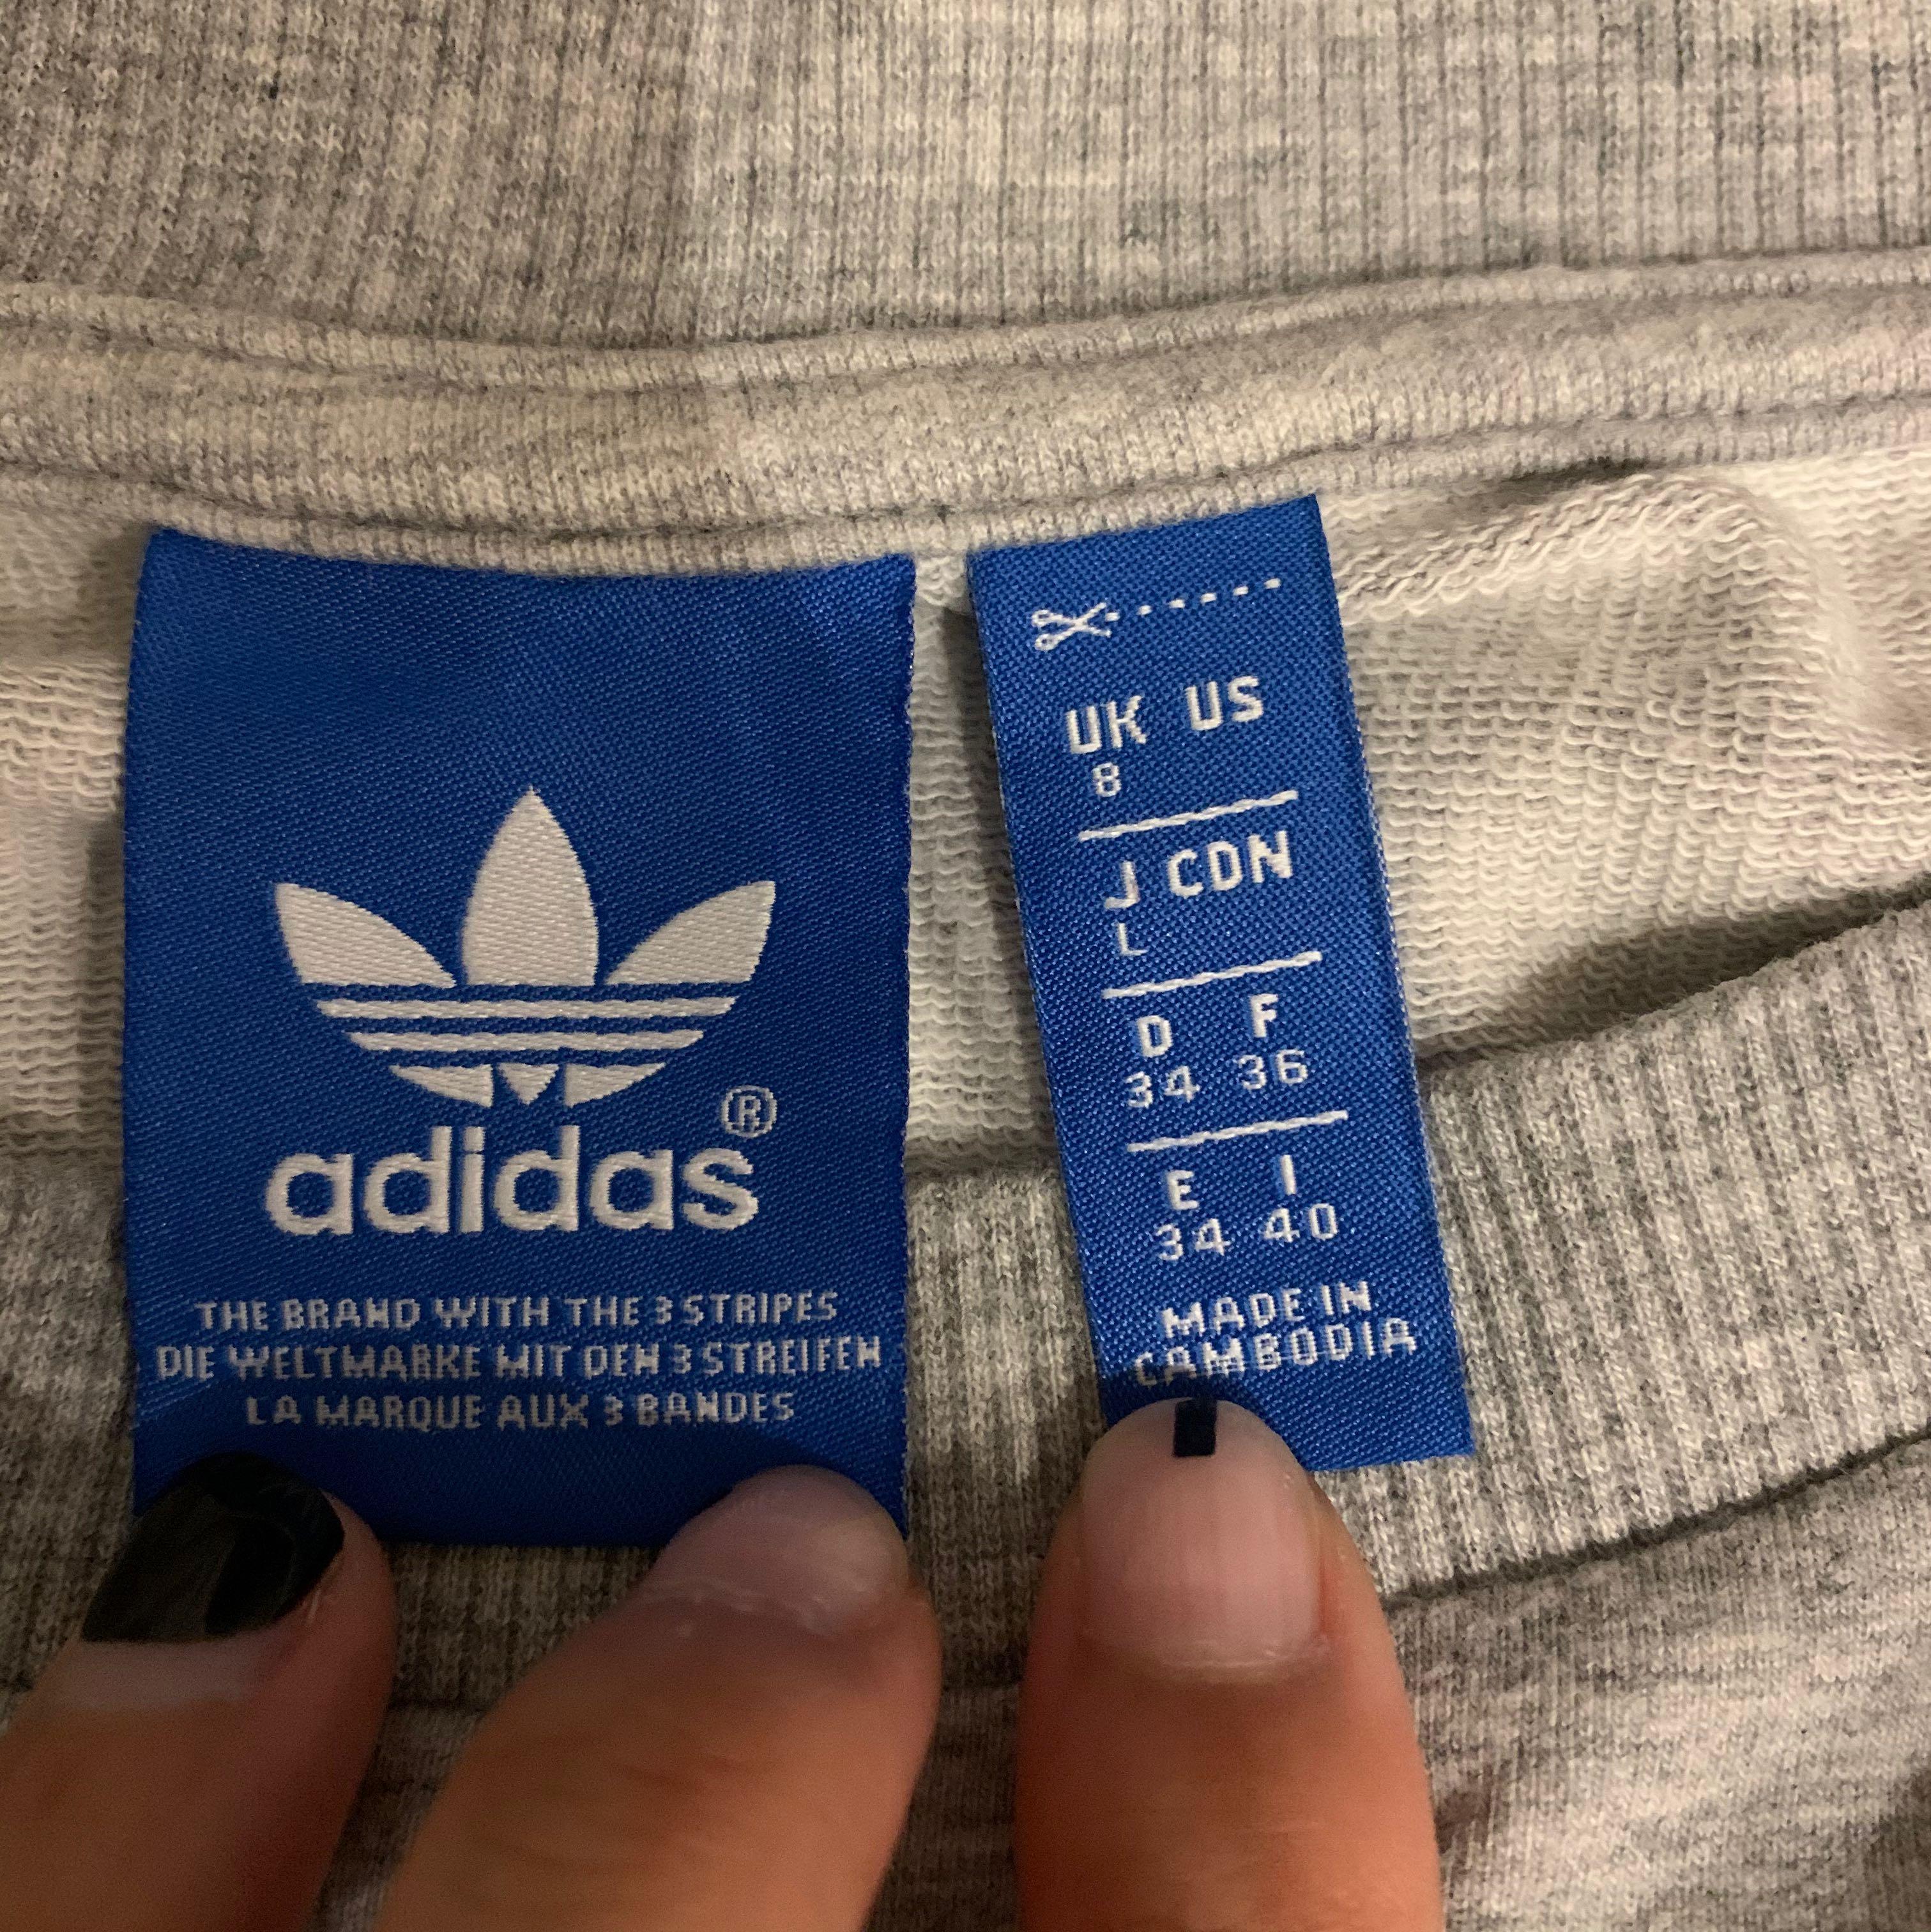 Adidas Pullover Sweatshirt Women S Fashion Clothes Outerwear On Carousell